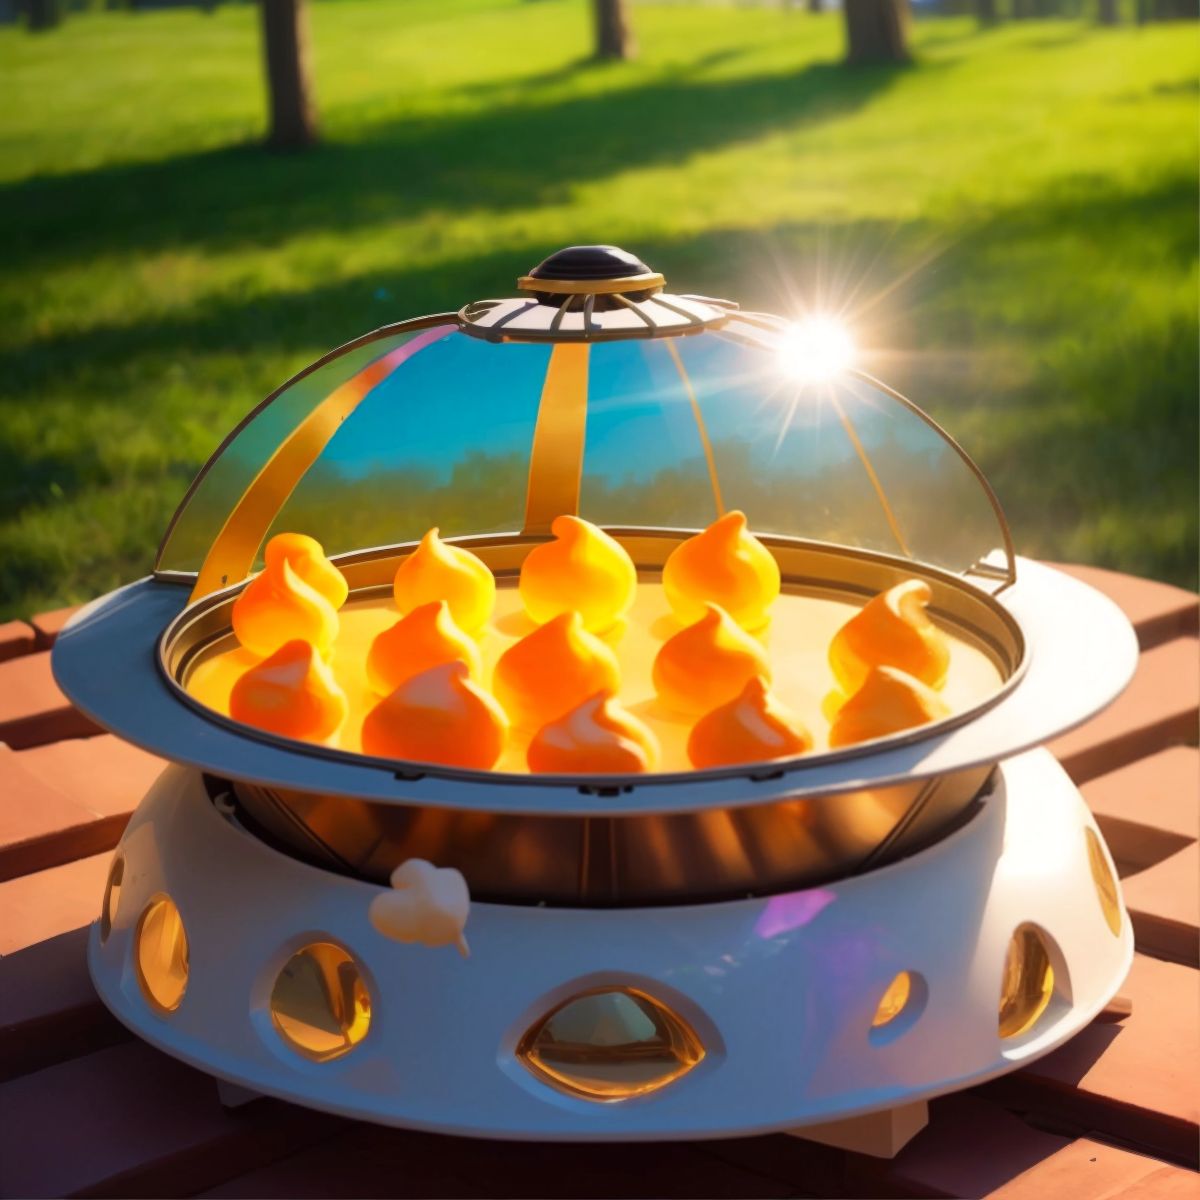 A solar oven with melting marshmallows inside, with the sun shining brightly above